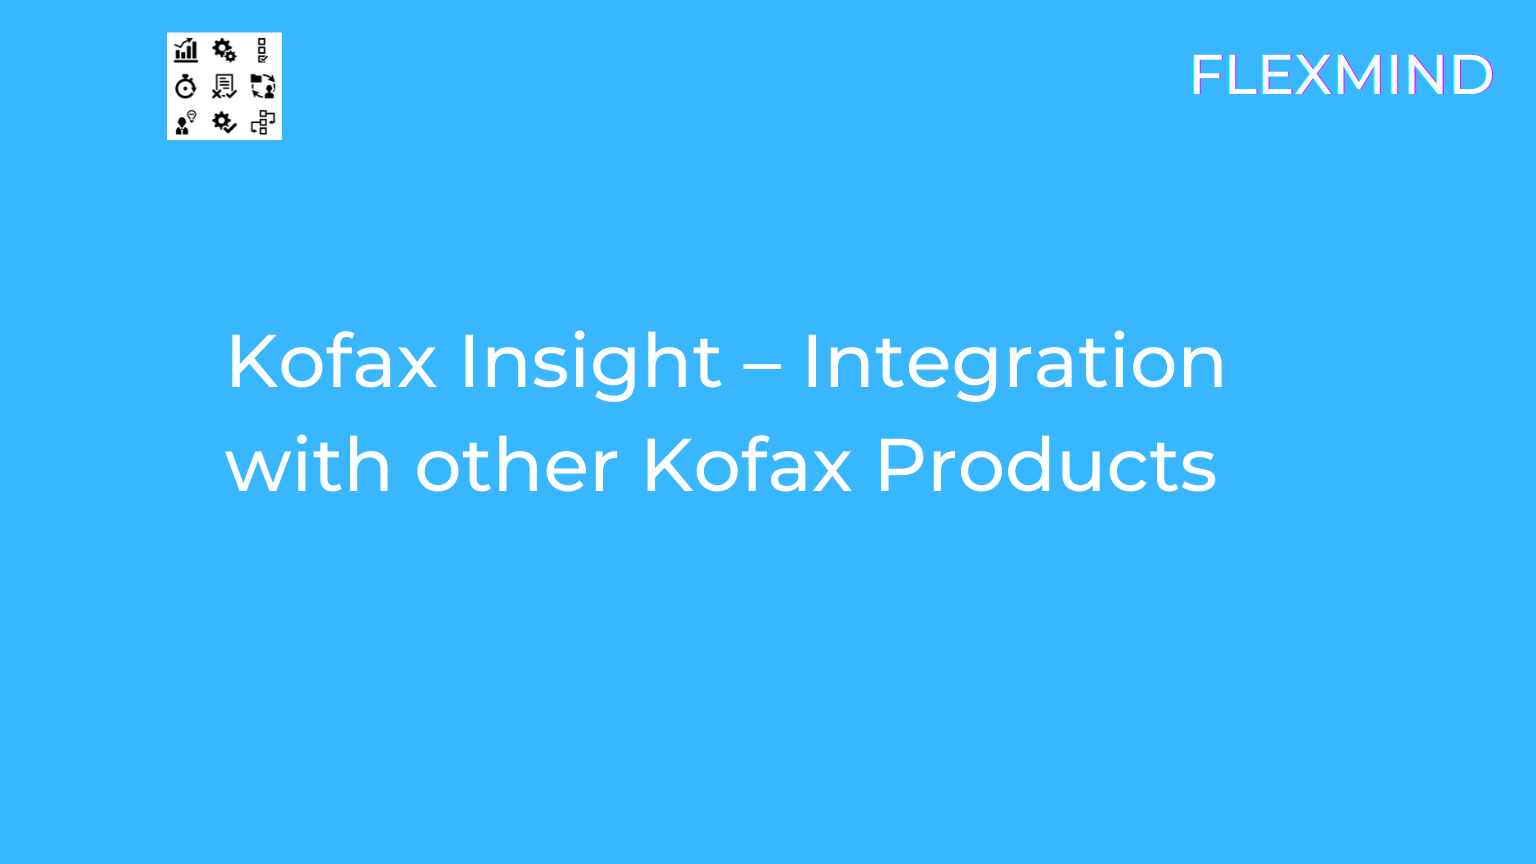 Kofax Insight – Integration with other Kofax Products